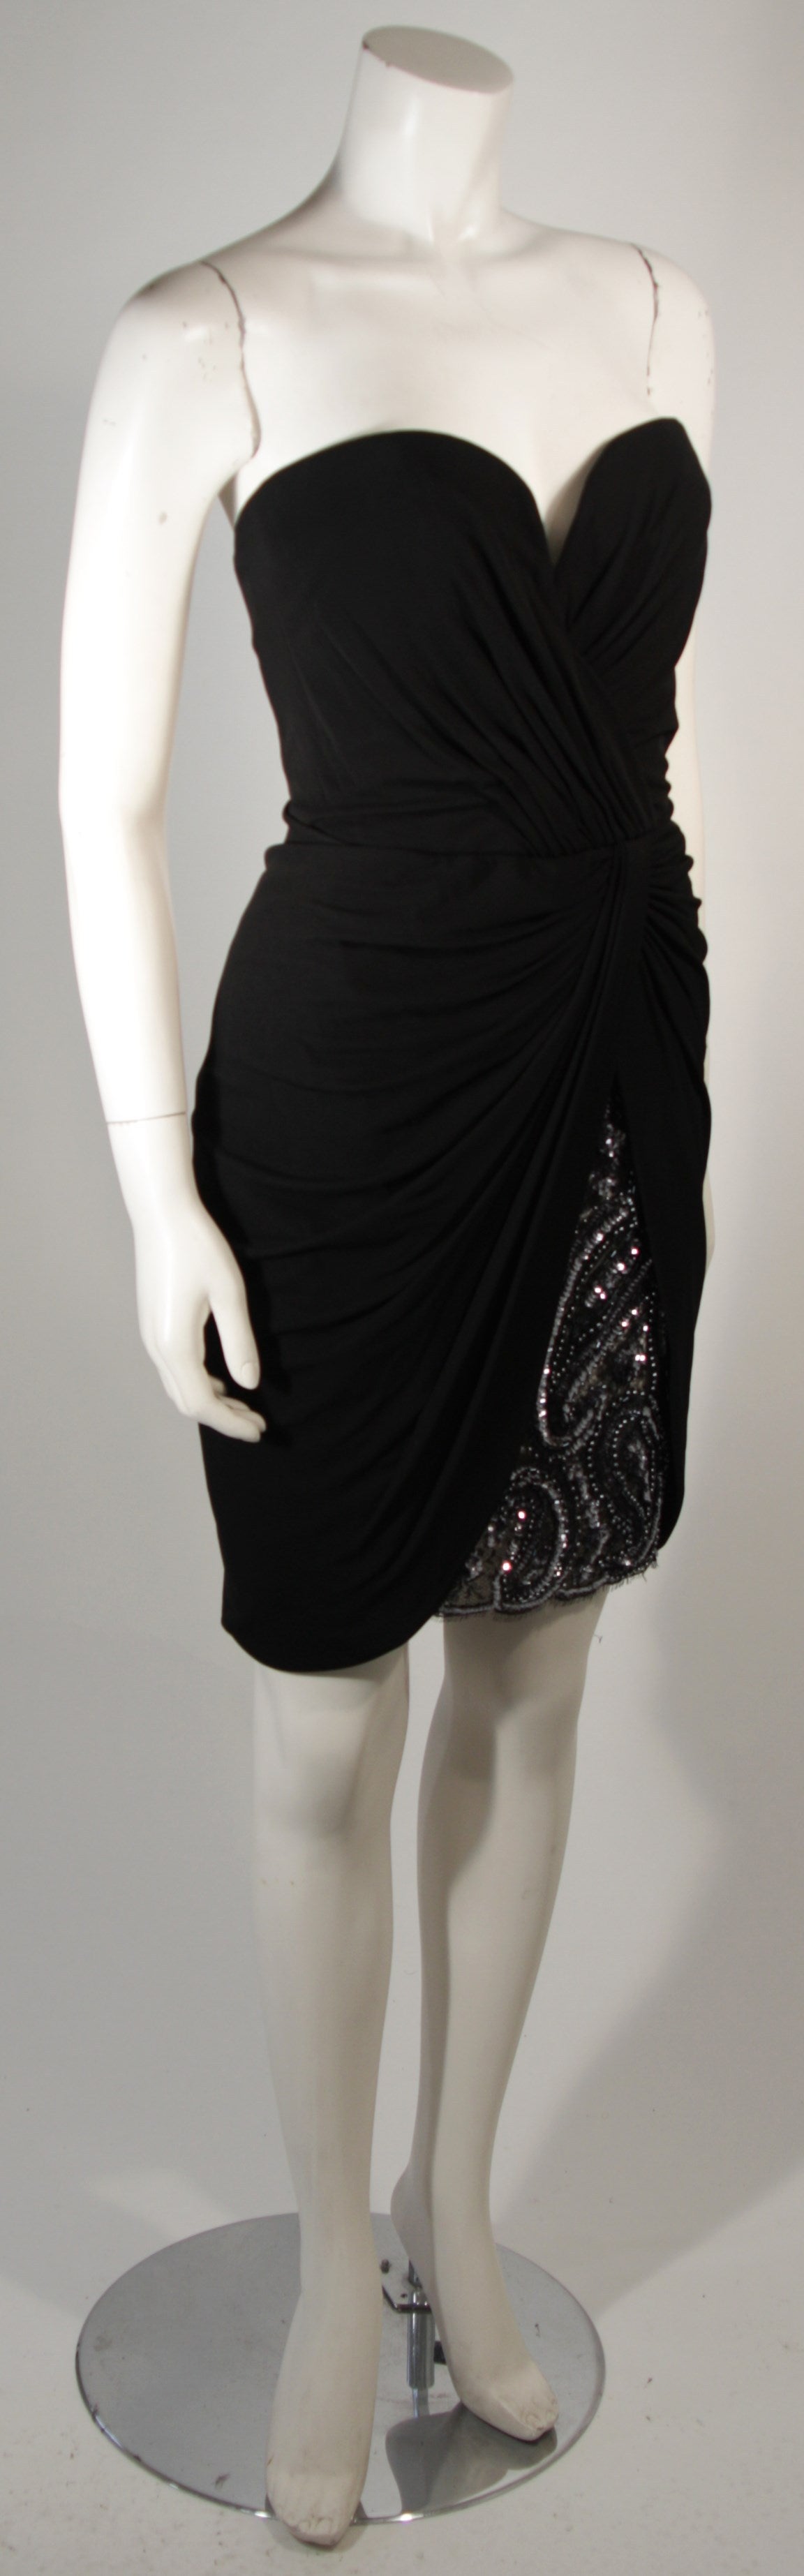 Vicky Tiel Black Jersey Cocktail Dress with Sequin Detail Size 38 In Excellent Condition For Sale In Los Angeles, CA